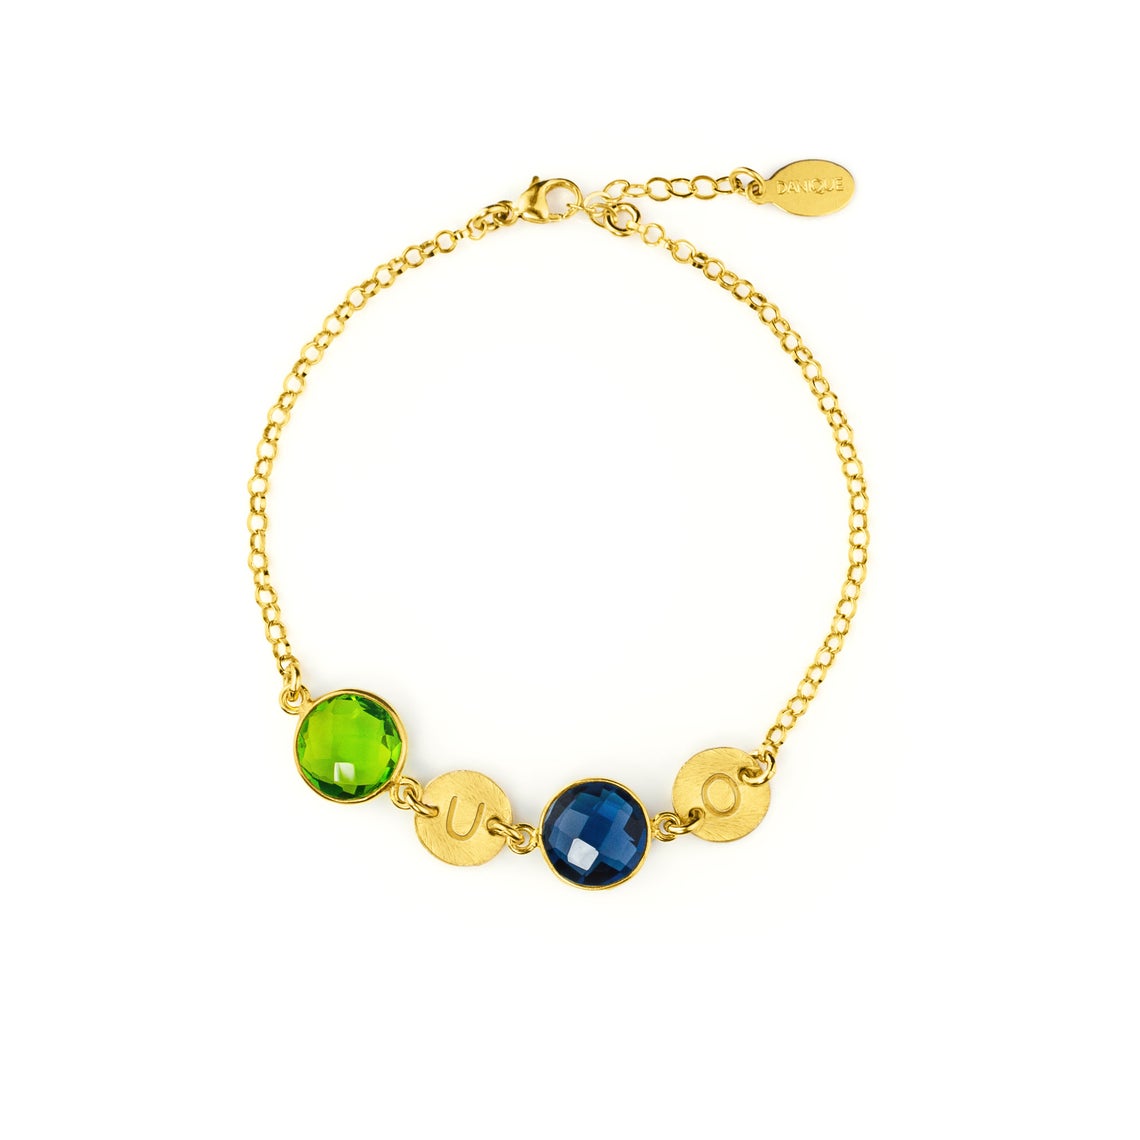 Buy Mia by Tanishq Cancer 14 kt Gold Bracelet Online At Best Price @ Tata  CLiQ